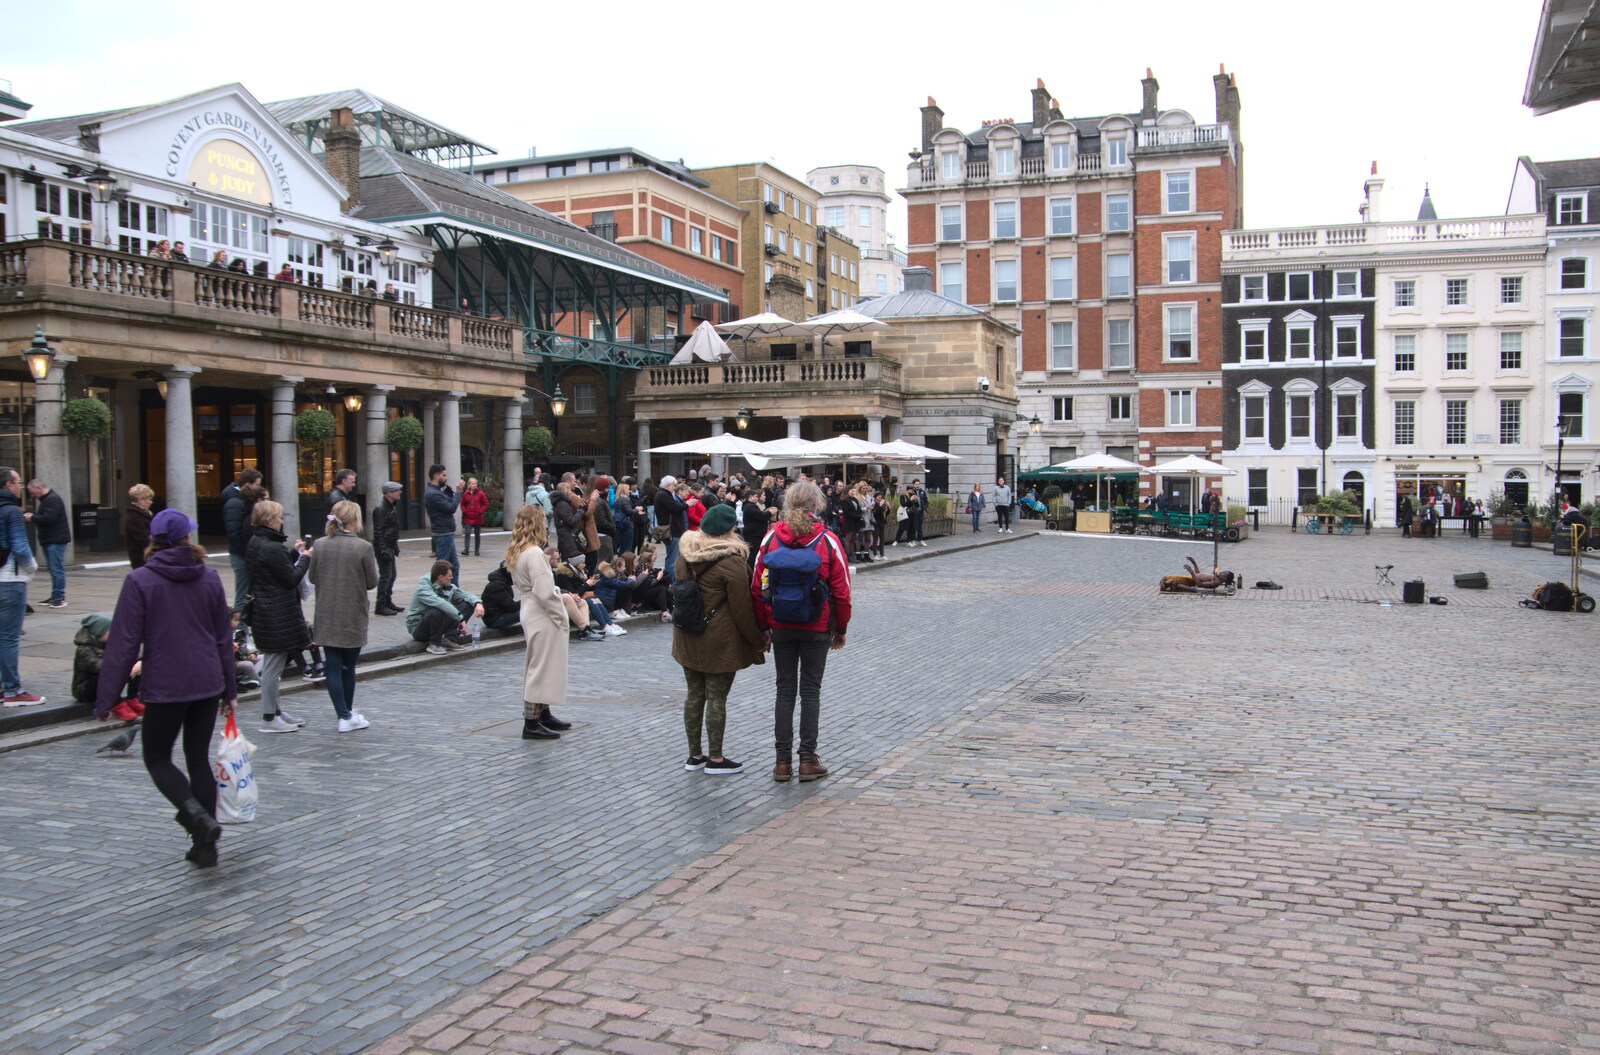 Covent Garden 'piazza' from A SwiftKey Memorial Service, Covent Garden, London  - 13th March 2020